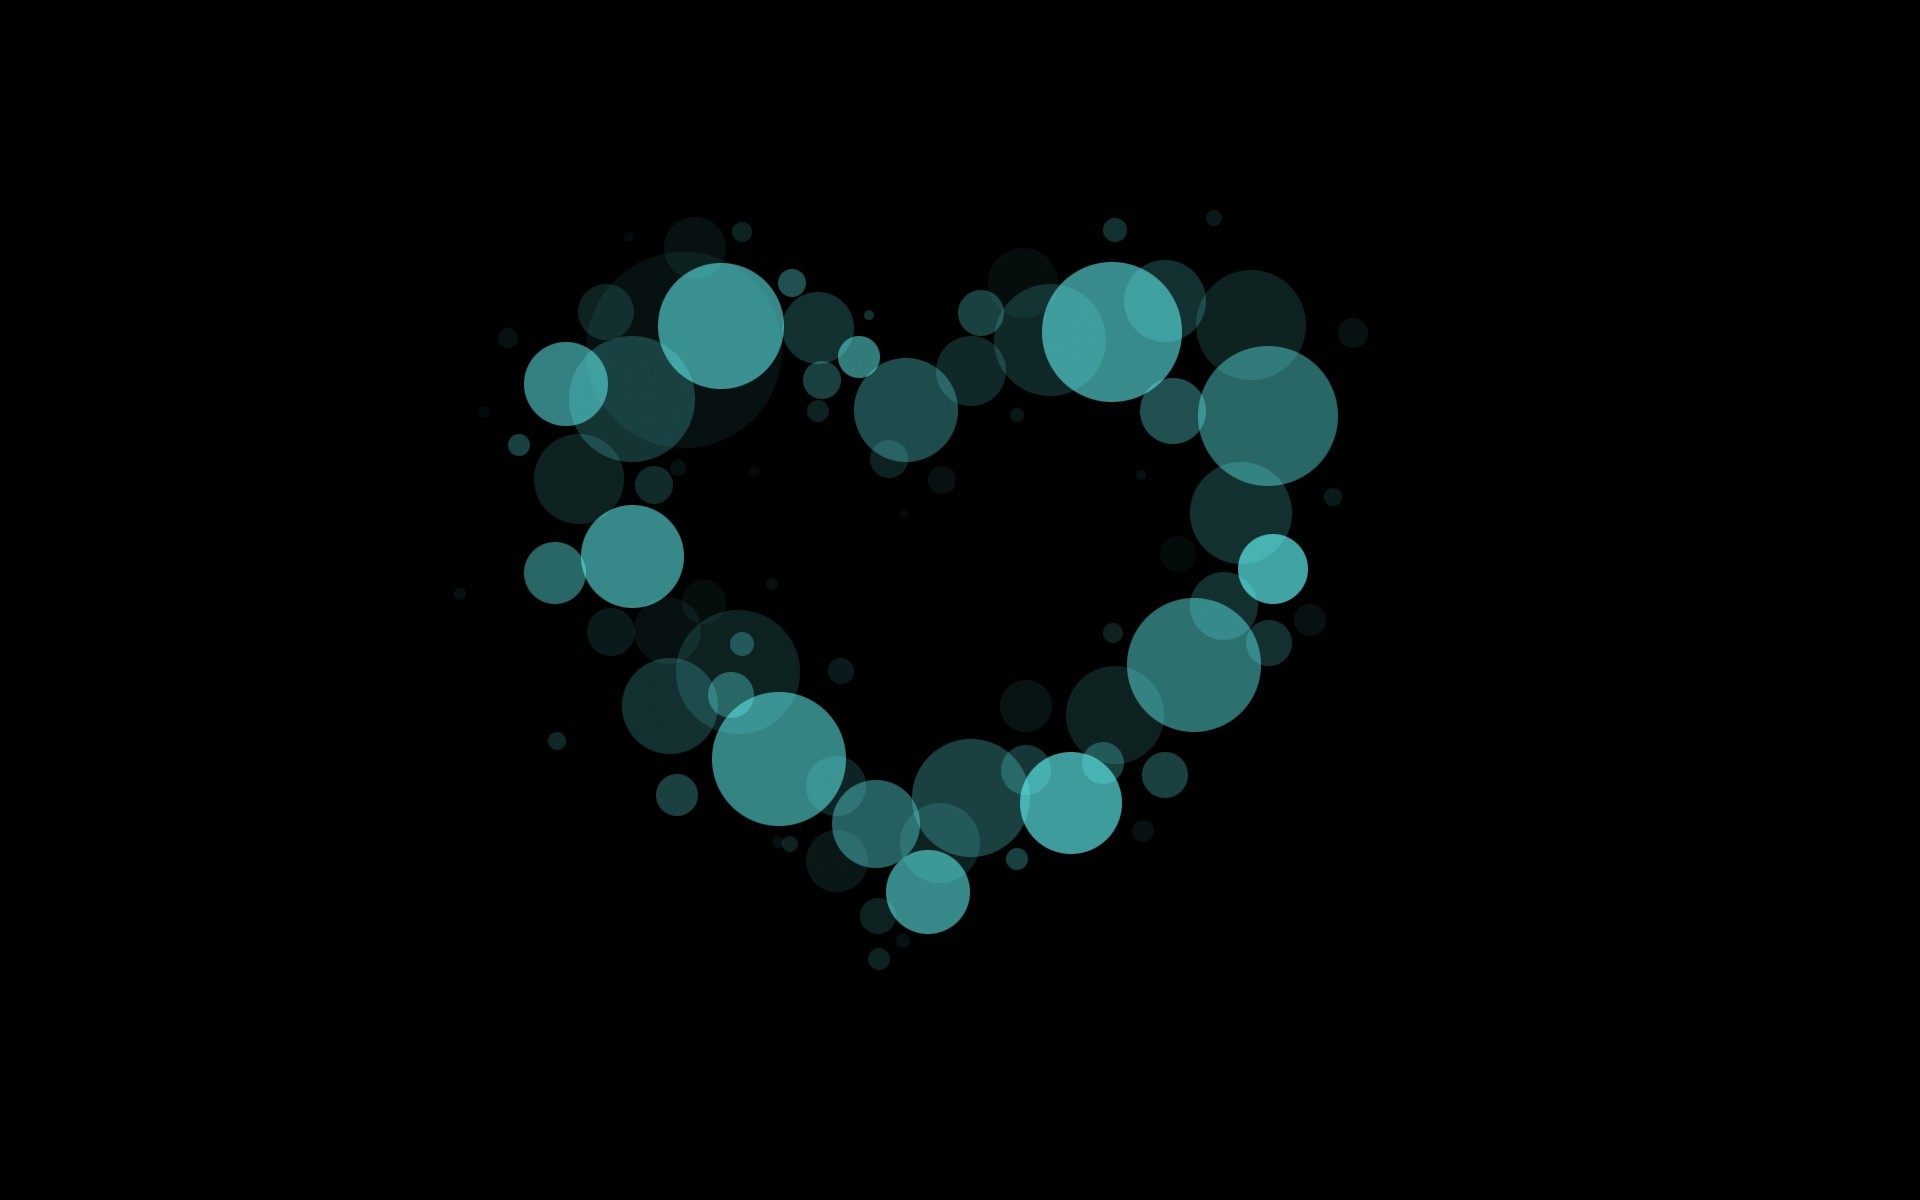 Abstract Heart Shape wallpapers Abstract Heart Shape stock photos